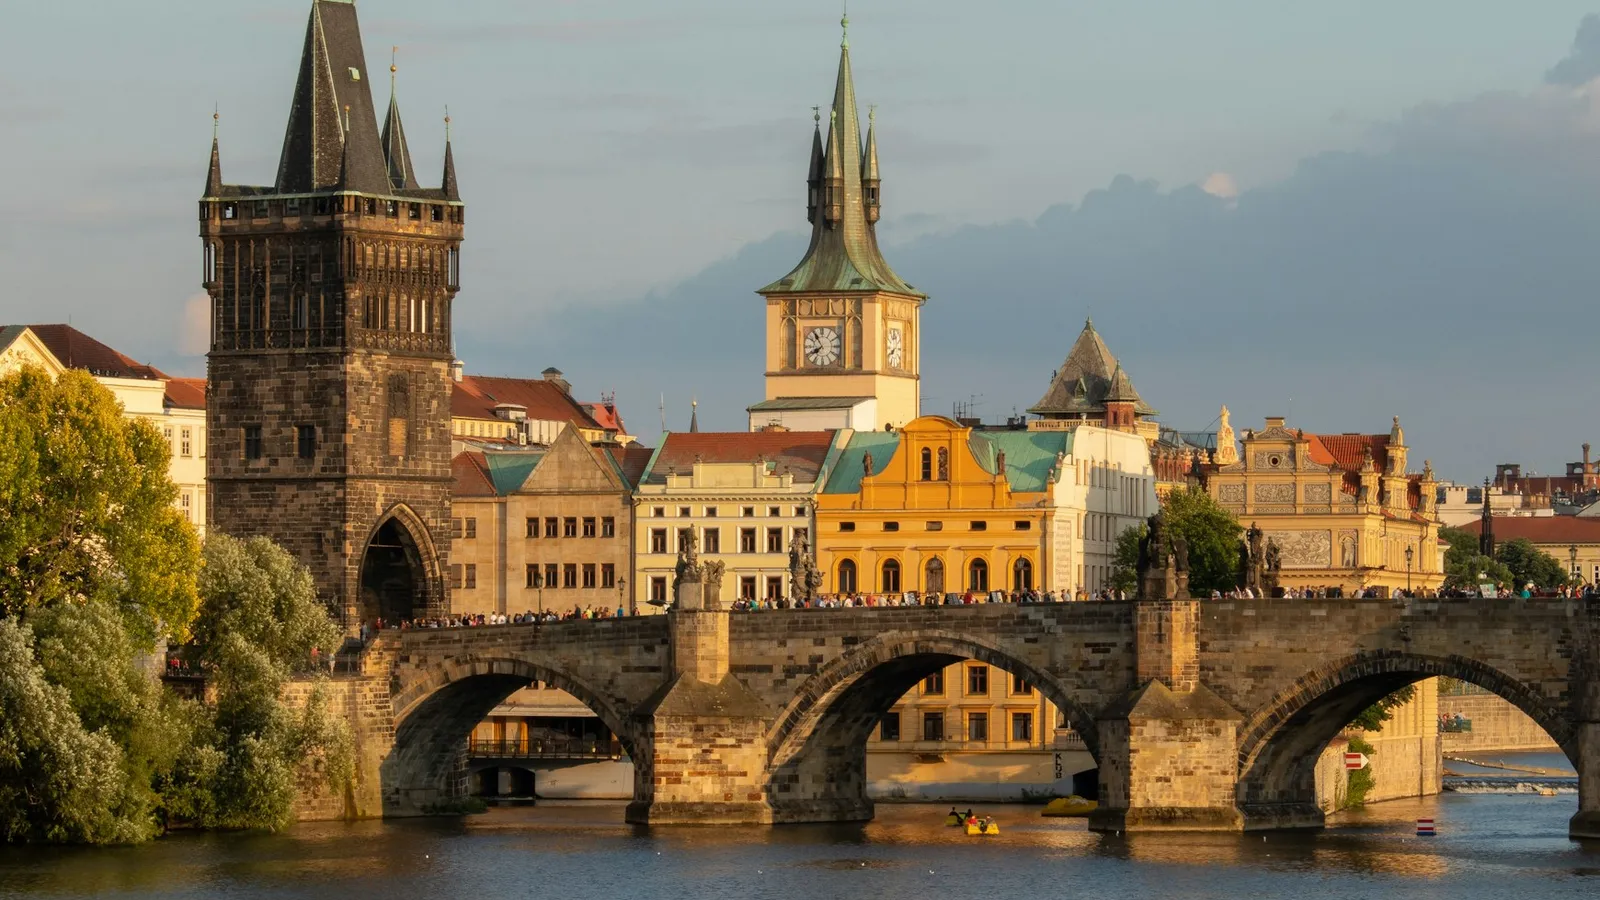 This article exposes the currency conversion rate scam of ATMs in Prague. It describes two dirty tricks used by these ATMs, targeting tourists and aiming to force them to withdraw large amounts of money at unfavorable exchange rates.